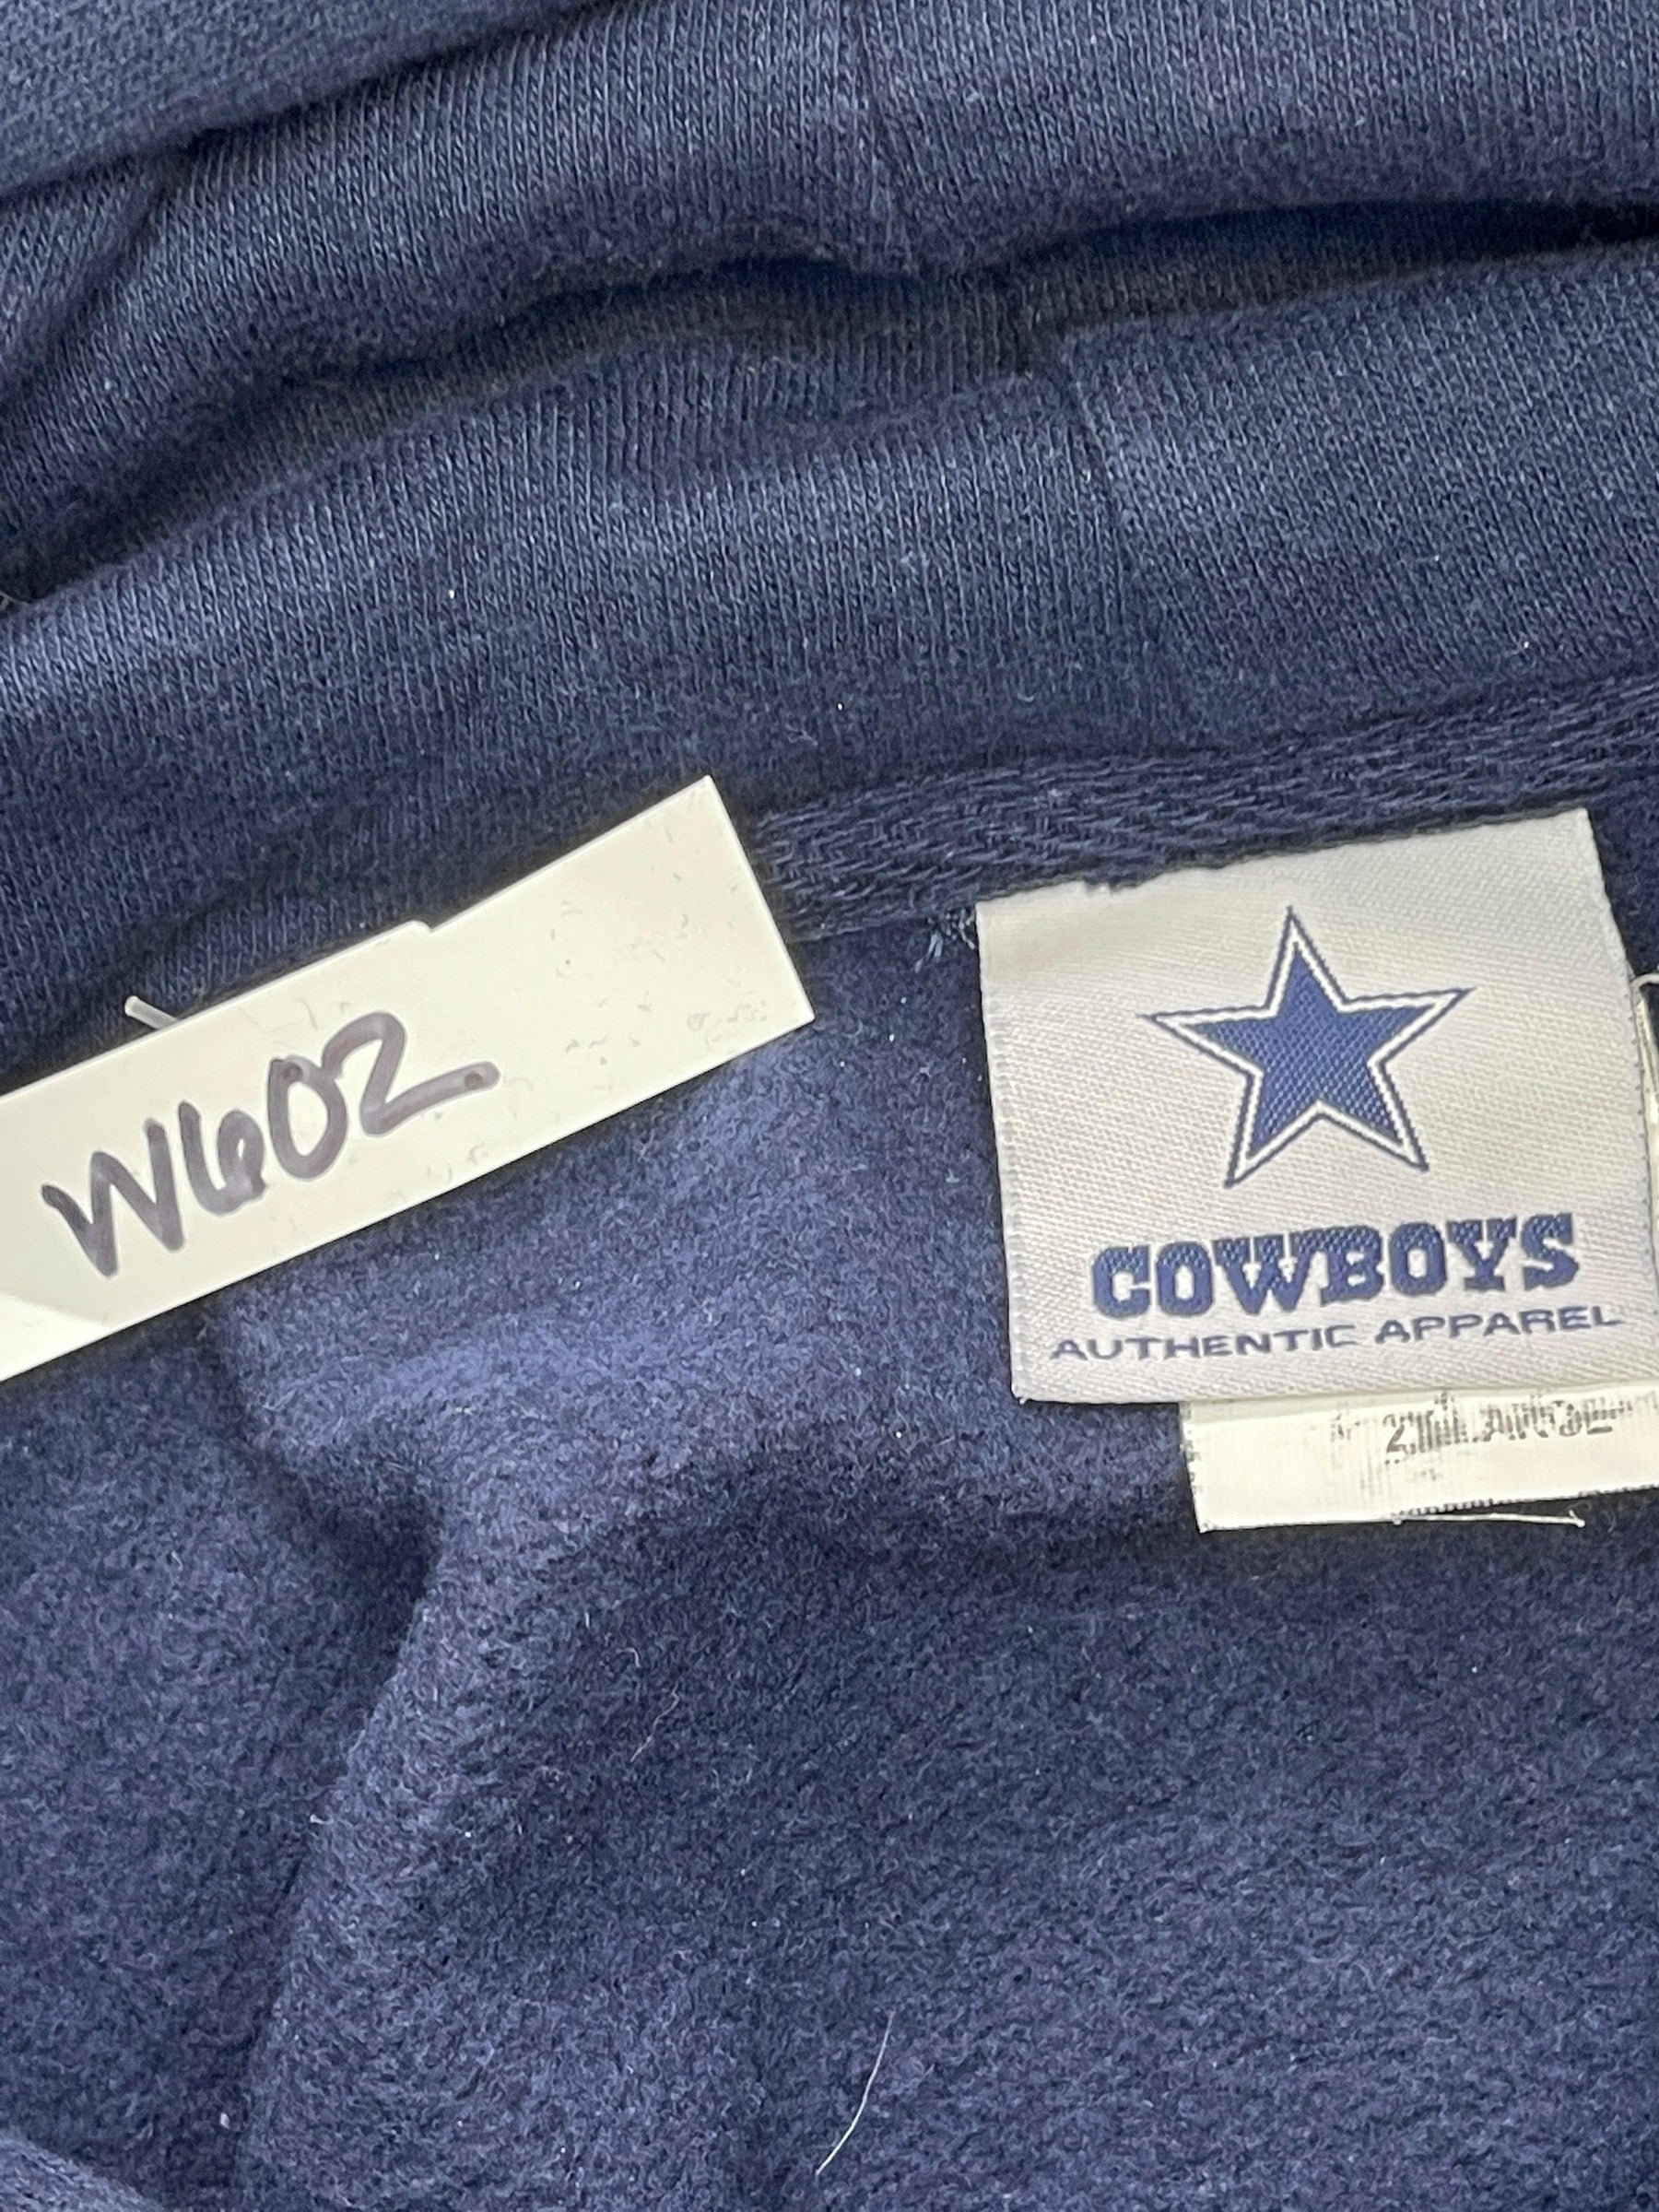 NFL Dallas Cowboys Authentic Thick Pullover Hoodie Men's 2X-Large